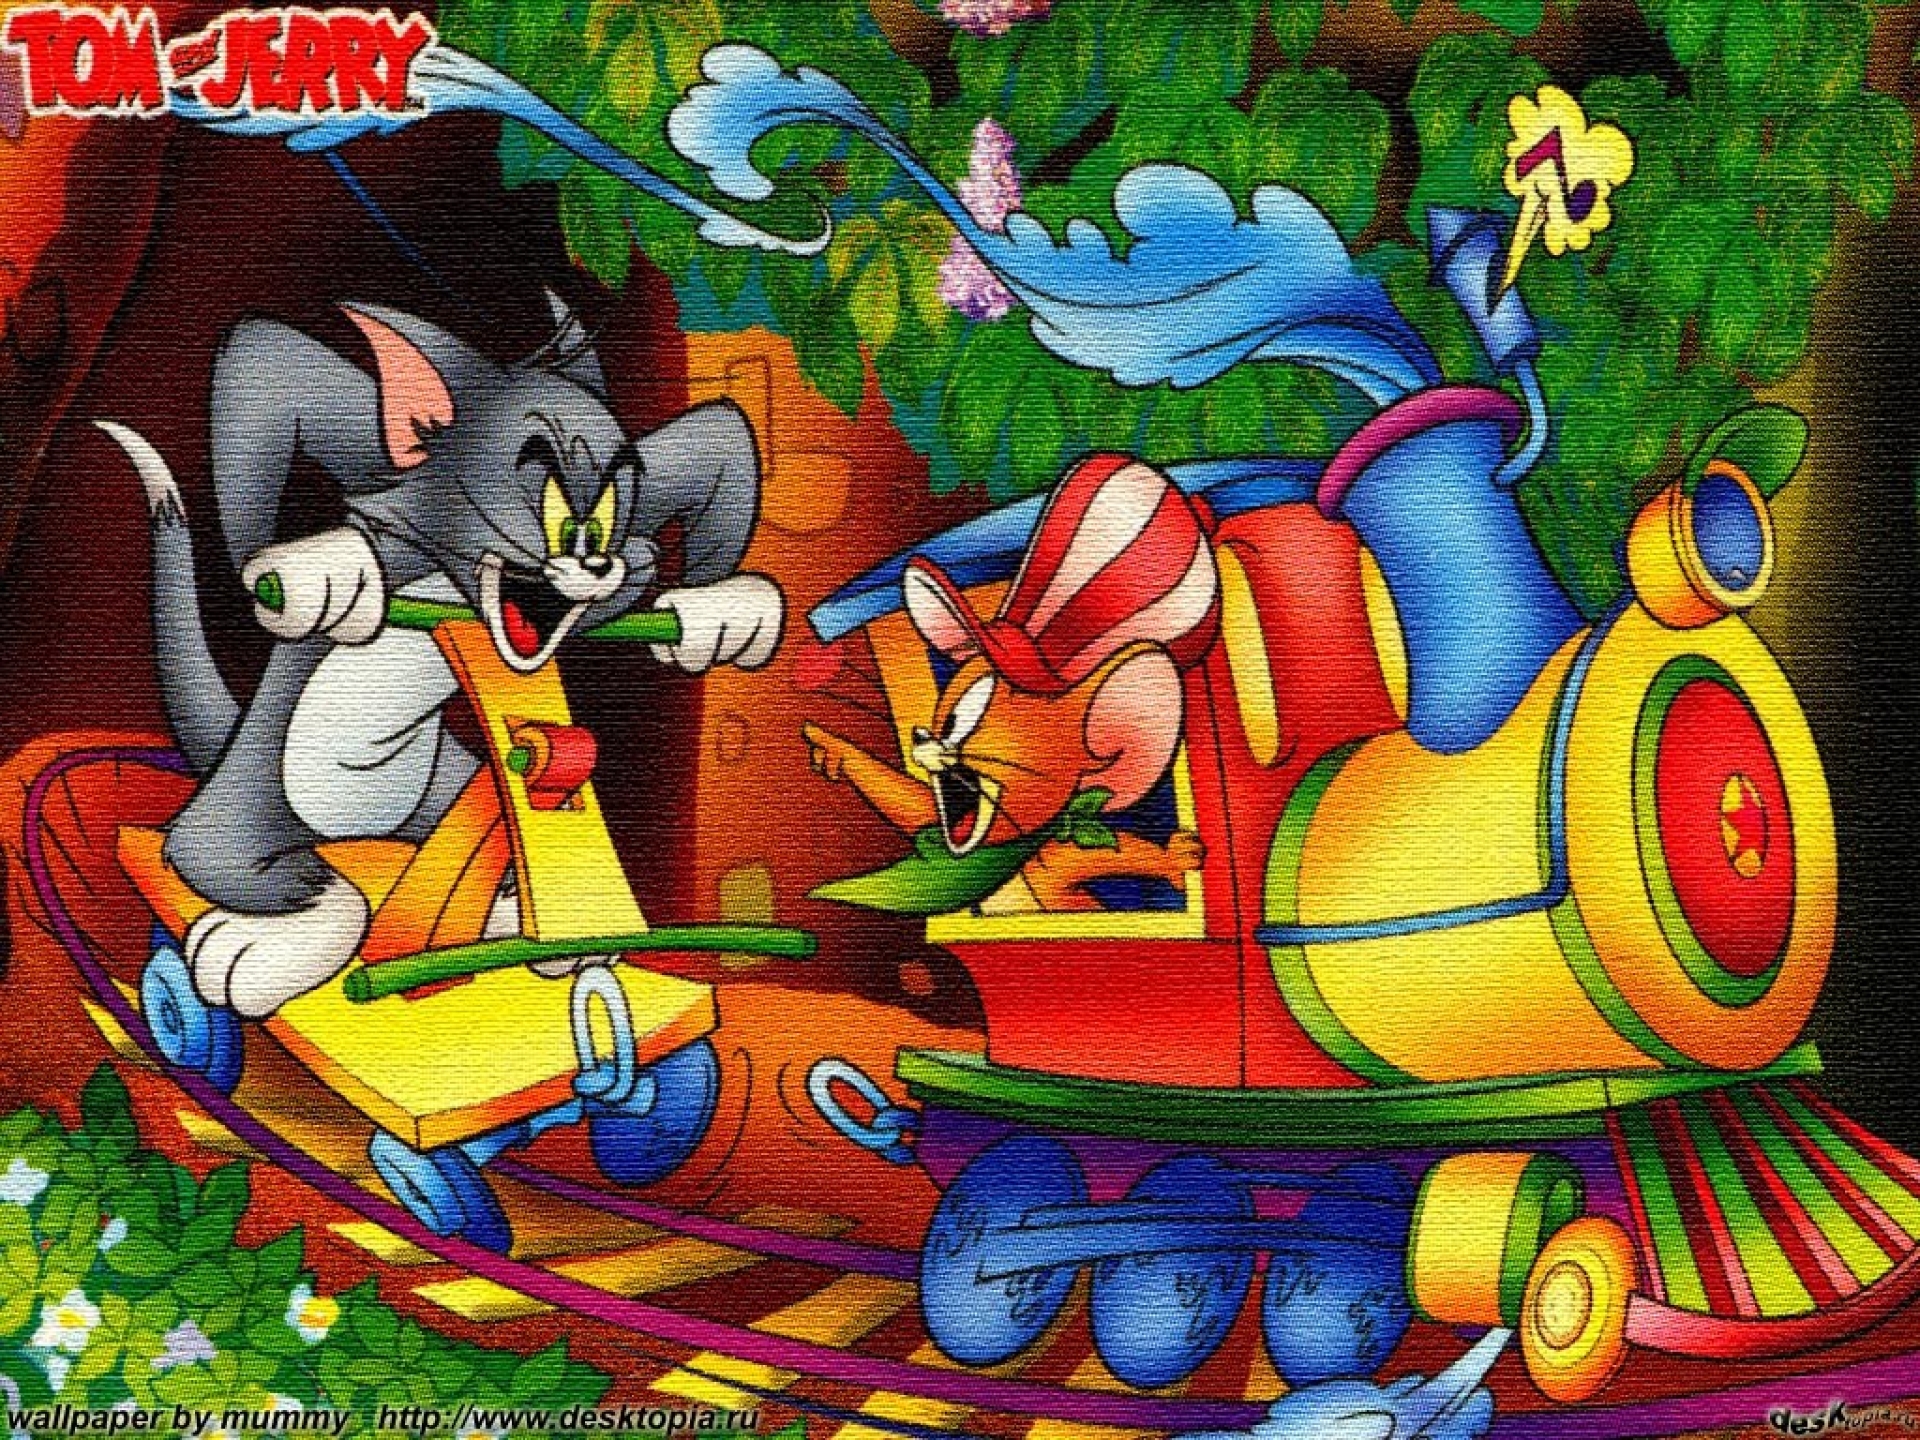 40+ Tom and Jerry HD Wallpapers and Backgrounds